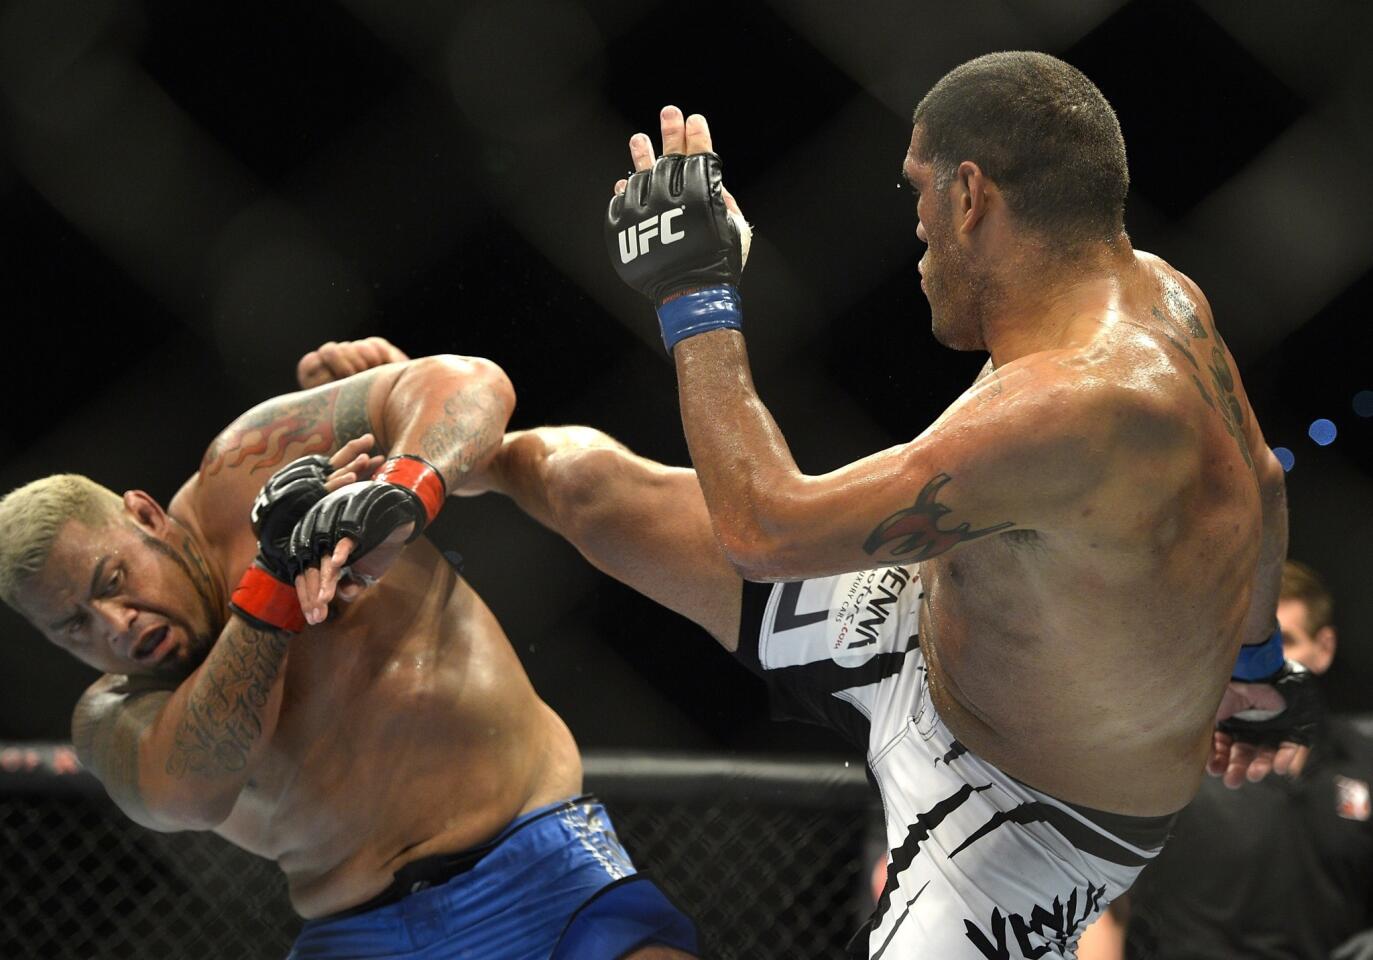 Antonio 'Bigfoot' Silva lands a kick against Mark Hunt during their heavyweight bout at UFC Fight Night on Saturday at the Brisbane Entertainment Center in Australia.